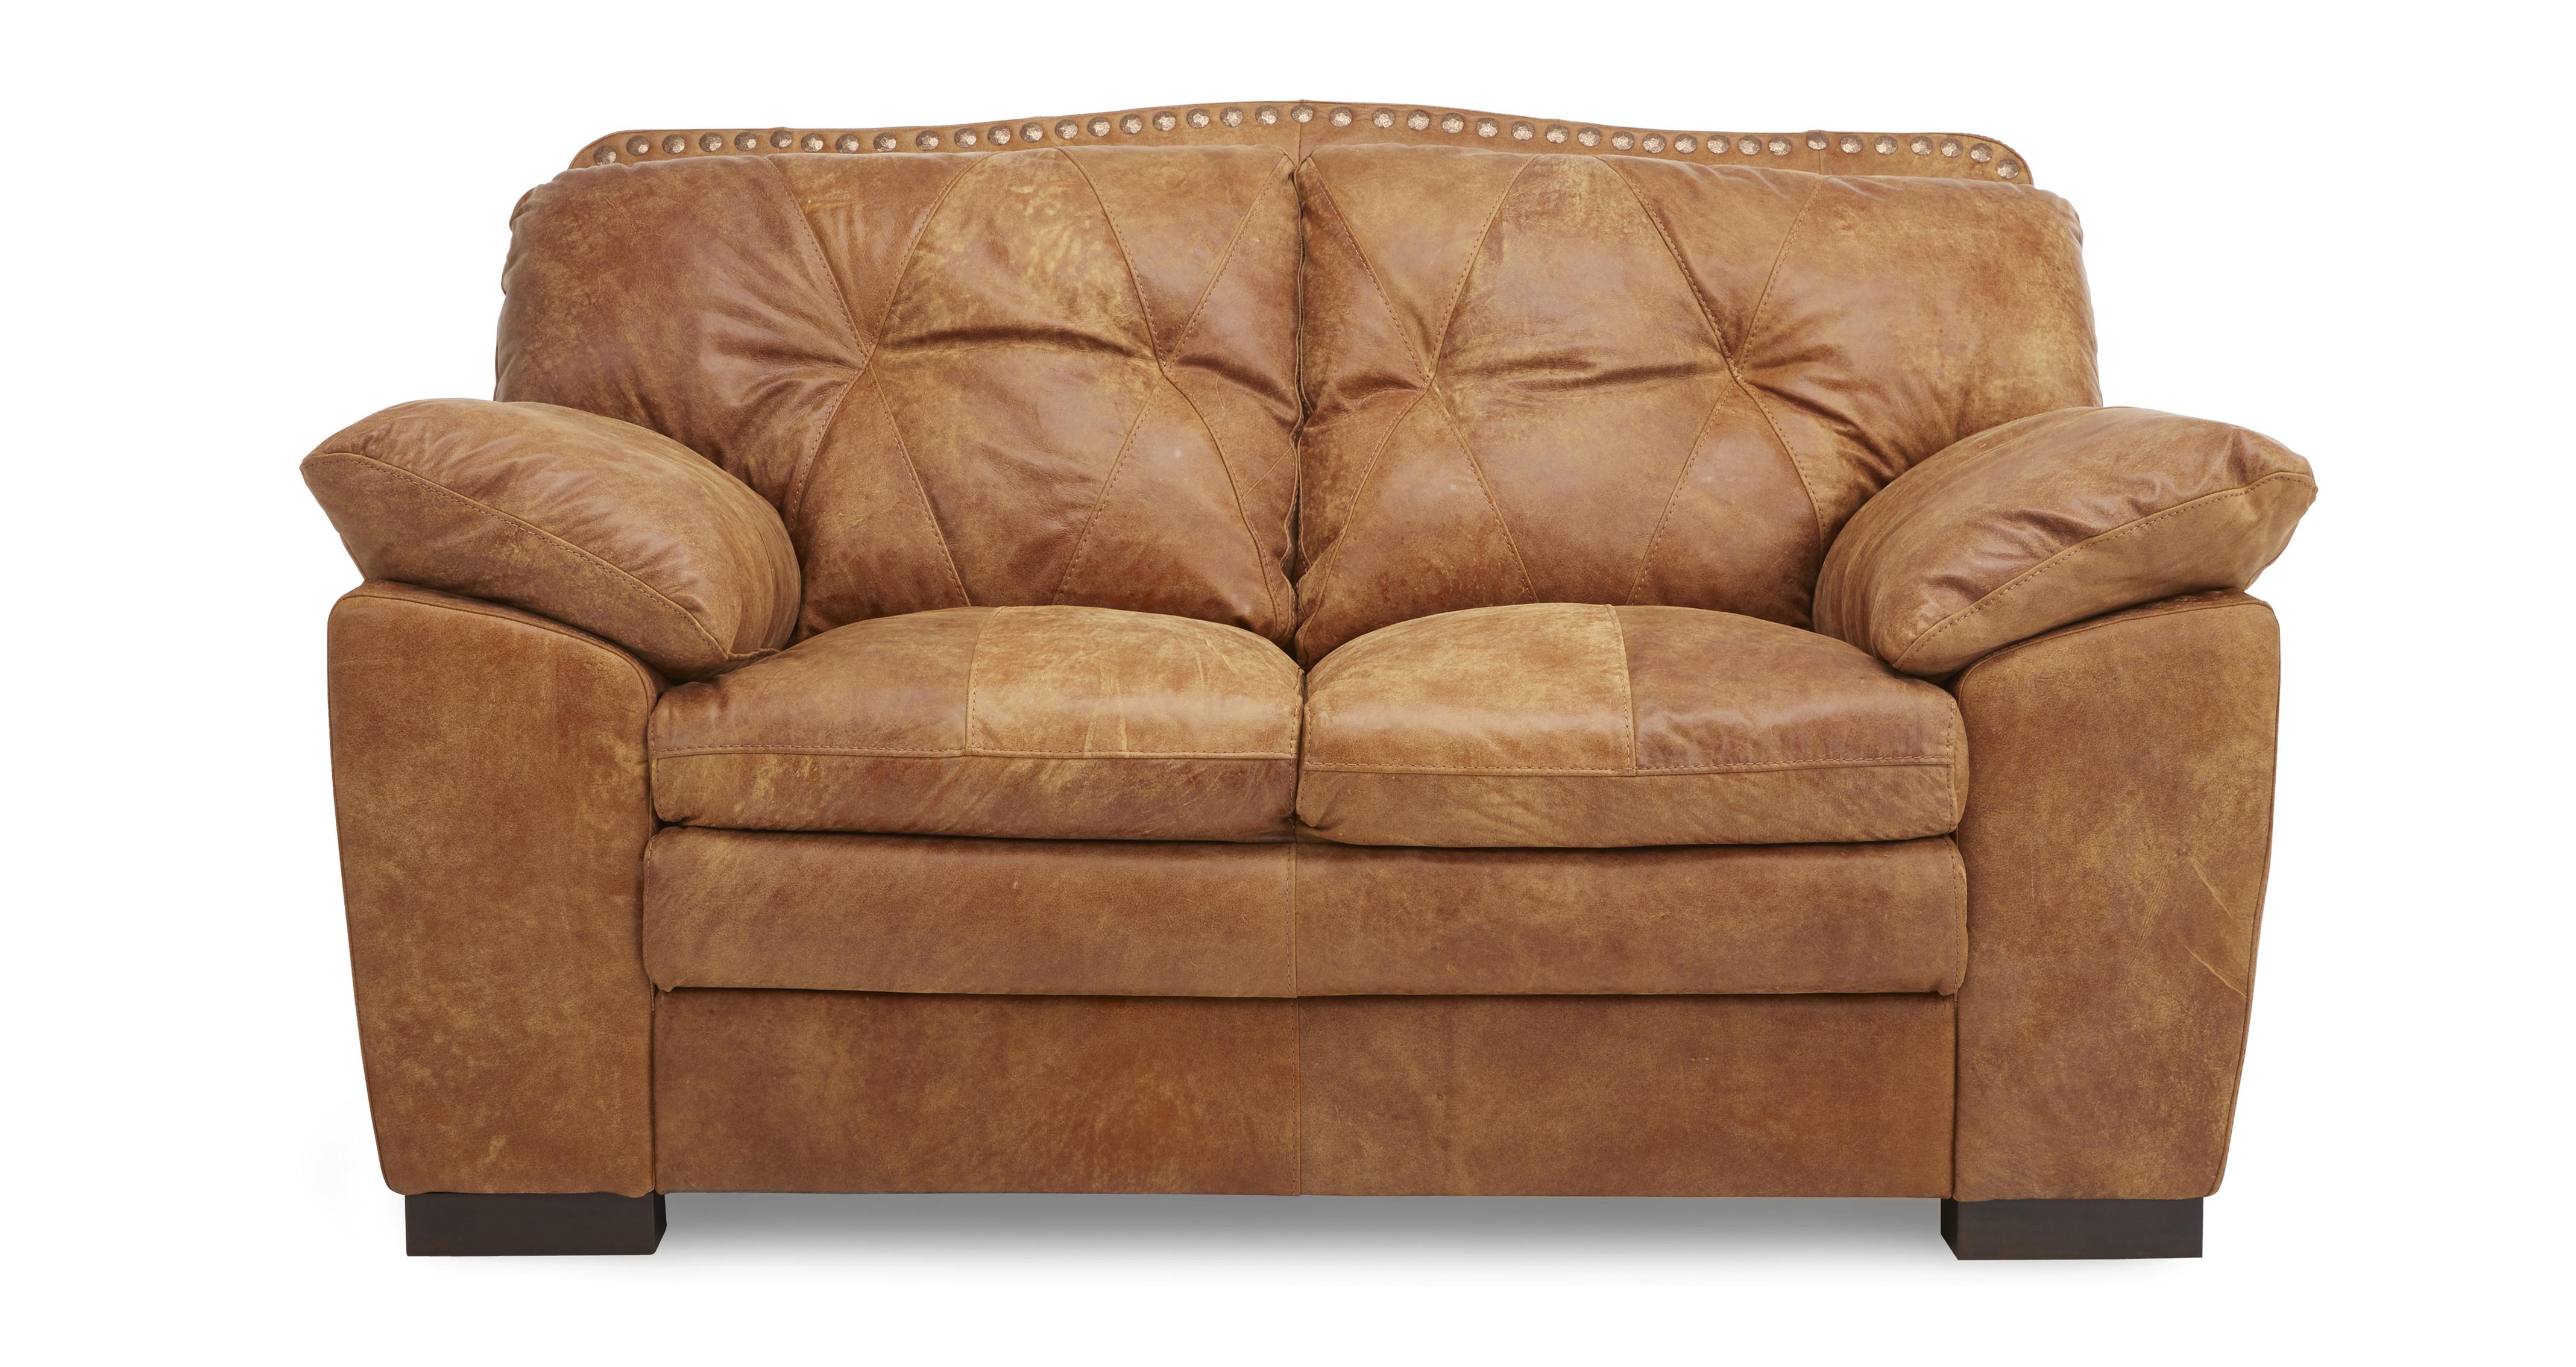 dfs 2 seater leather sofa